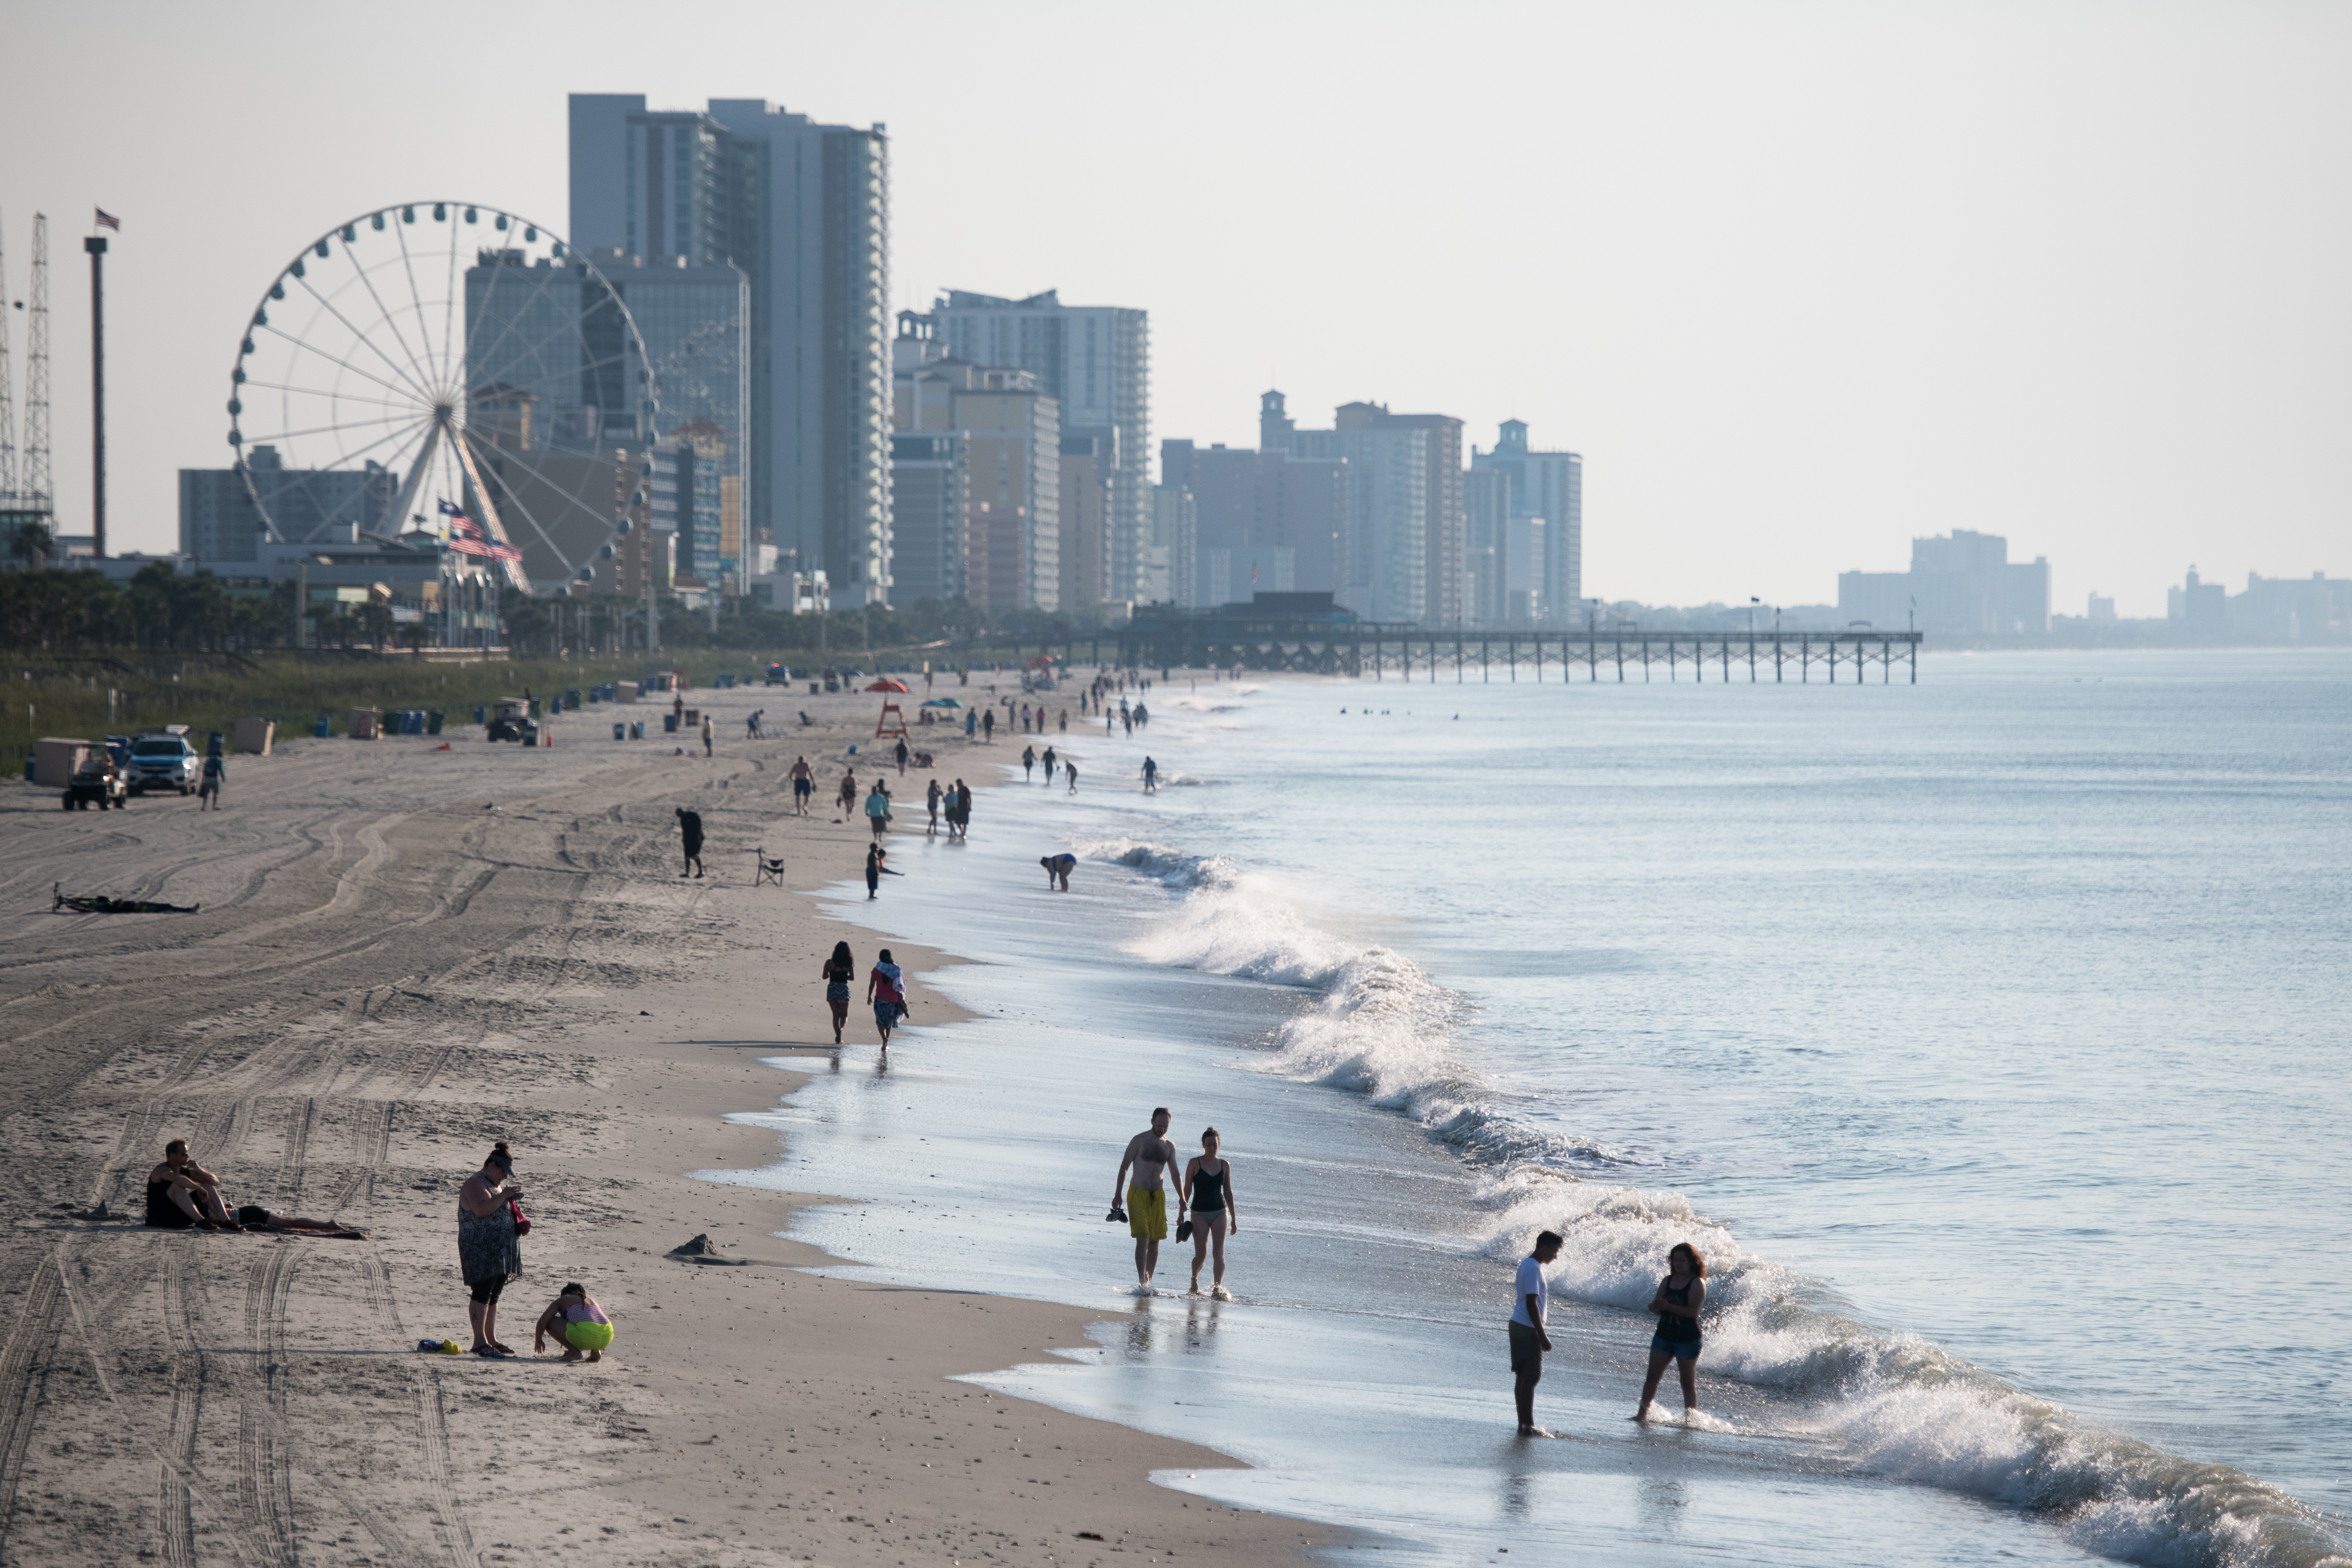 People walk along the beach on the morning of July 4 in Myrtle Beach, South Carolina.